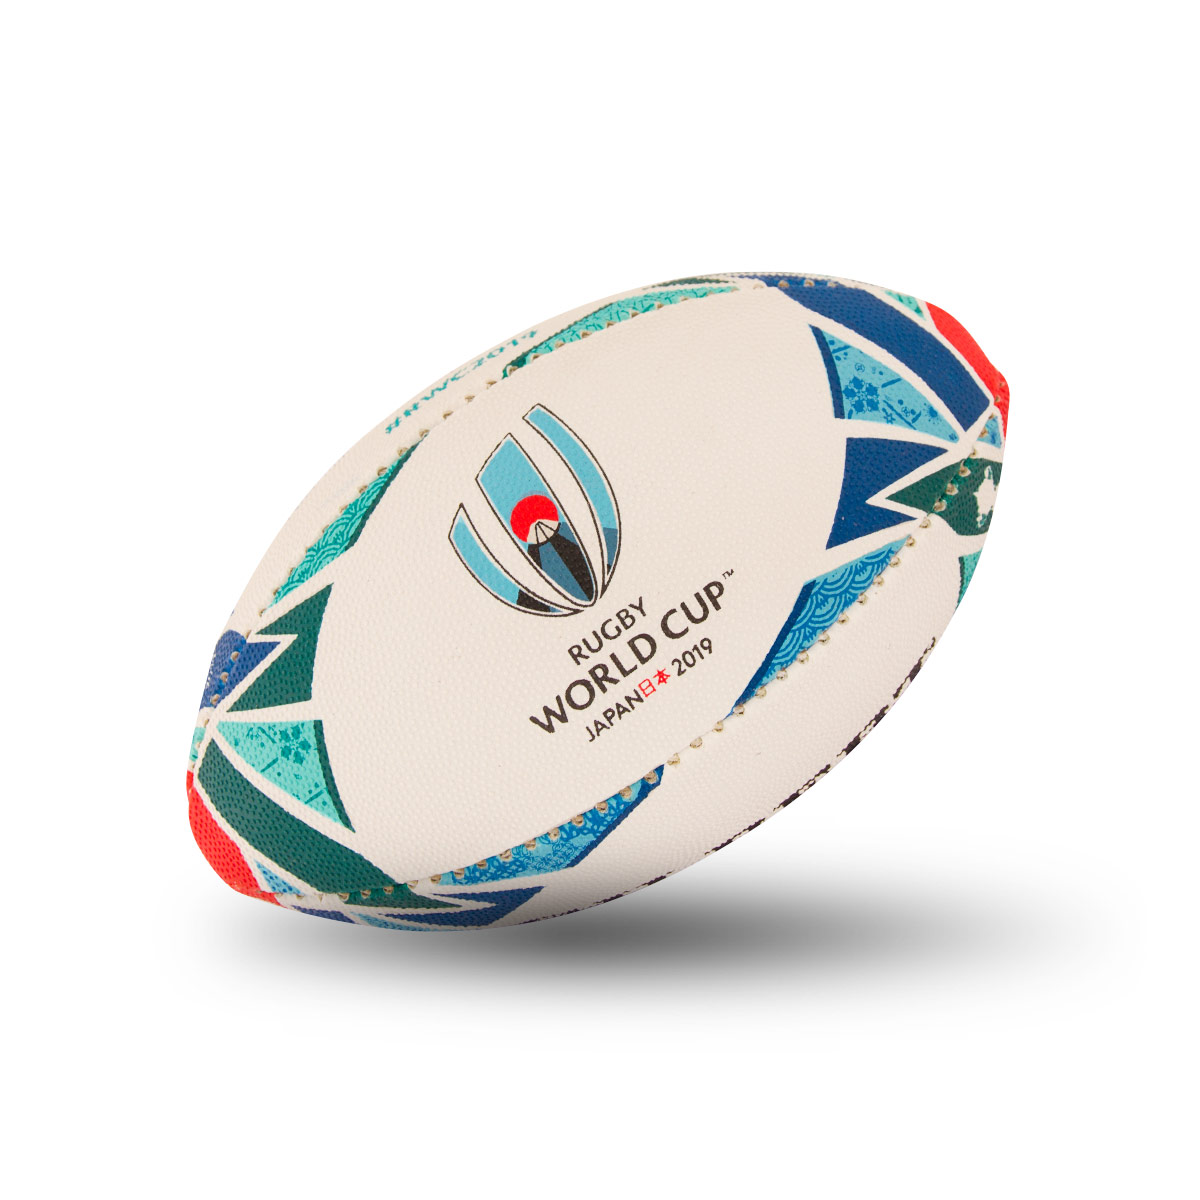 Gilbert Rugby World Cup 2019 Replica Mini Rugby Ball